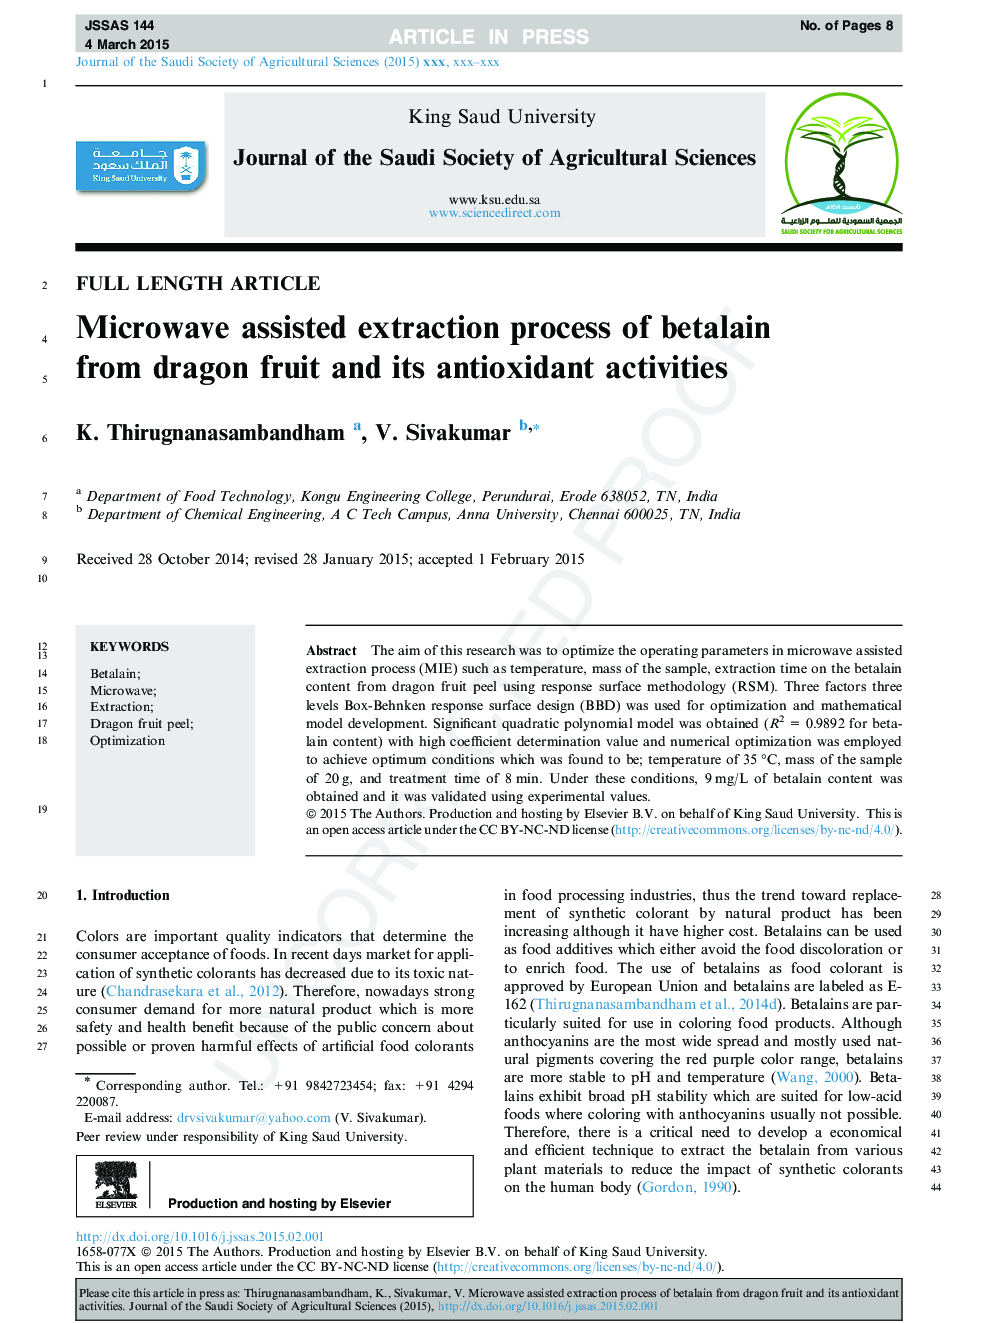 Microwave assisted extraction process of betalain from dragon fruit and its antioxidant activities